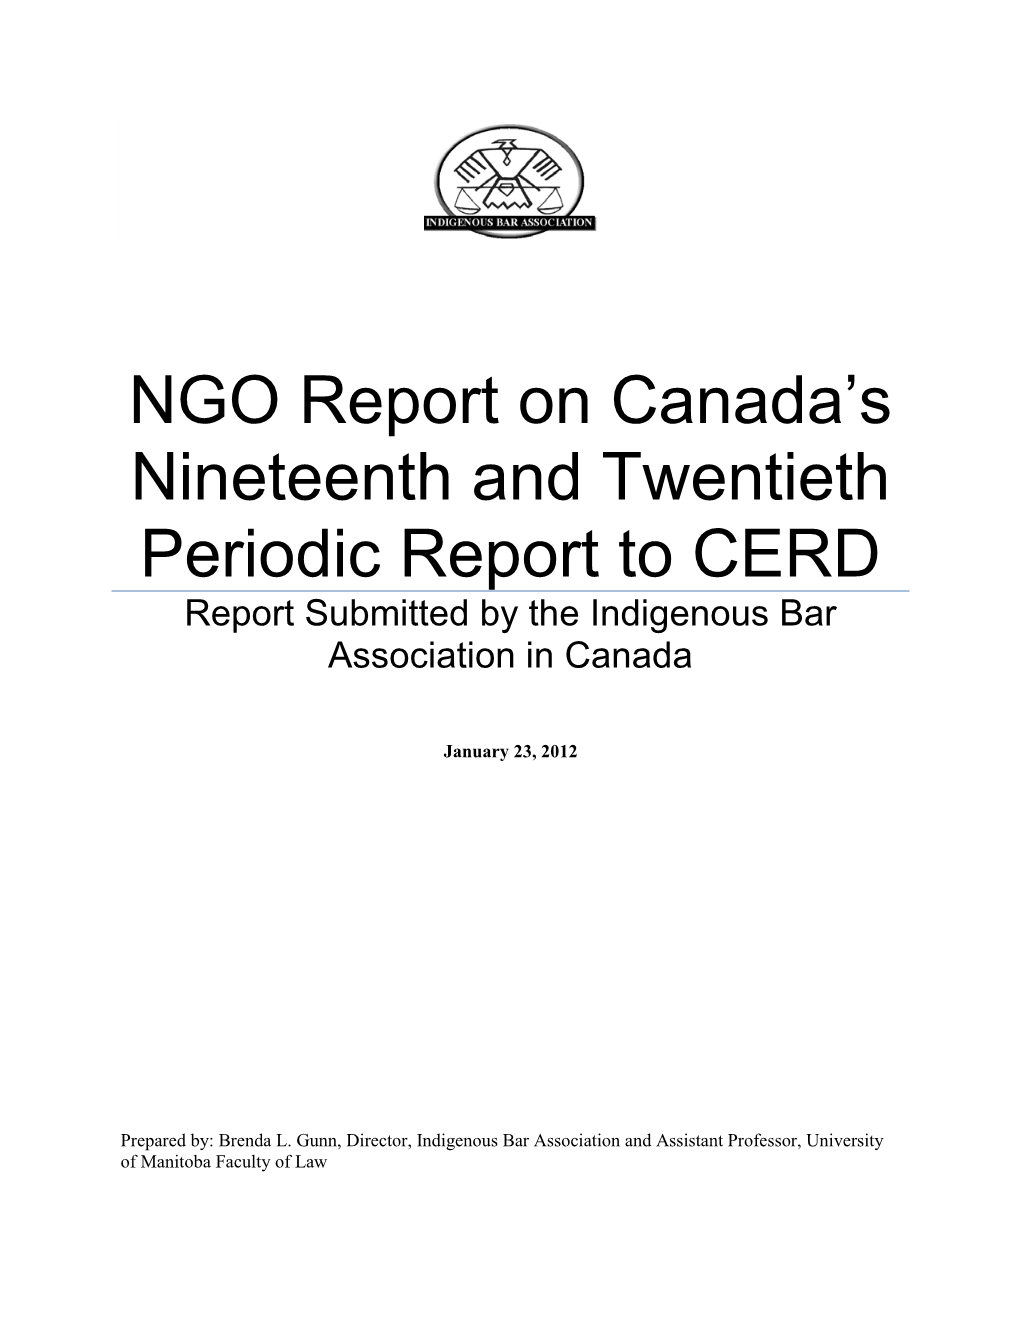 NGO Report on Canada's Nineteenth and Twentieth Periodic Report To